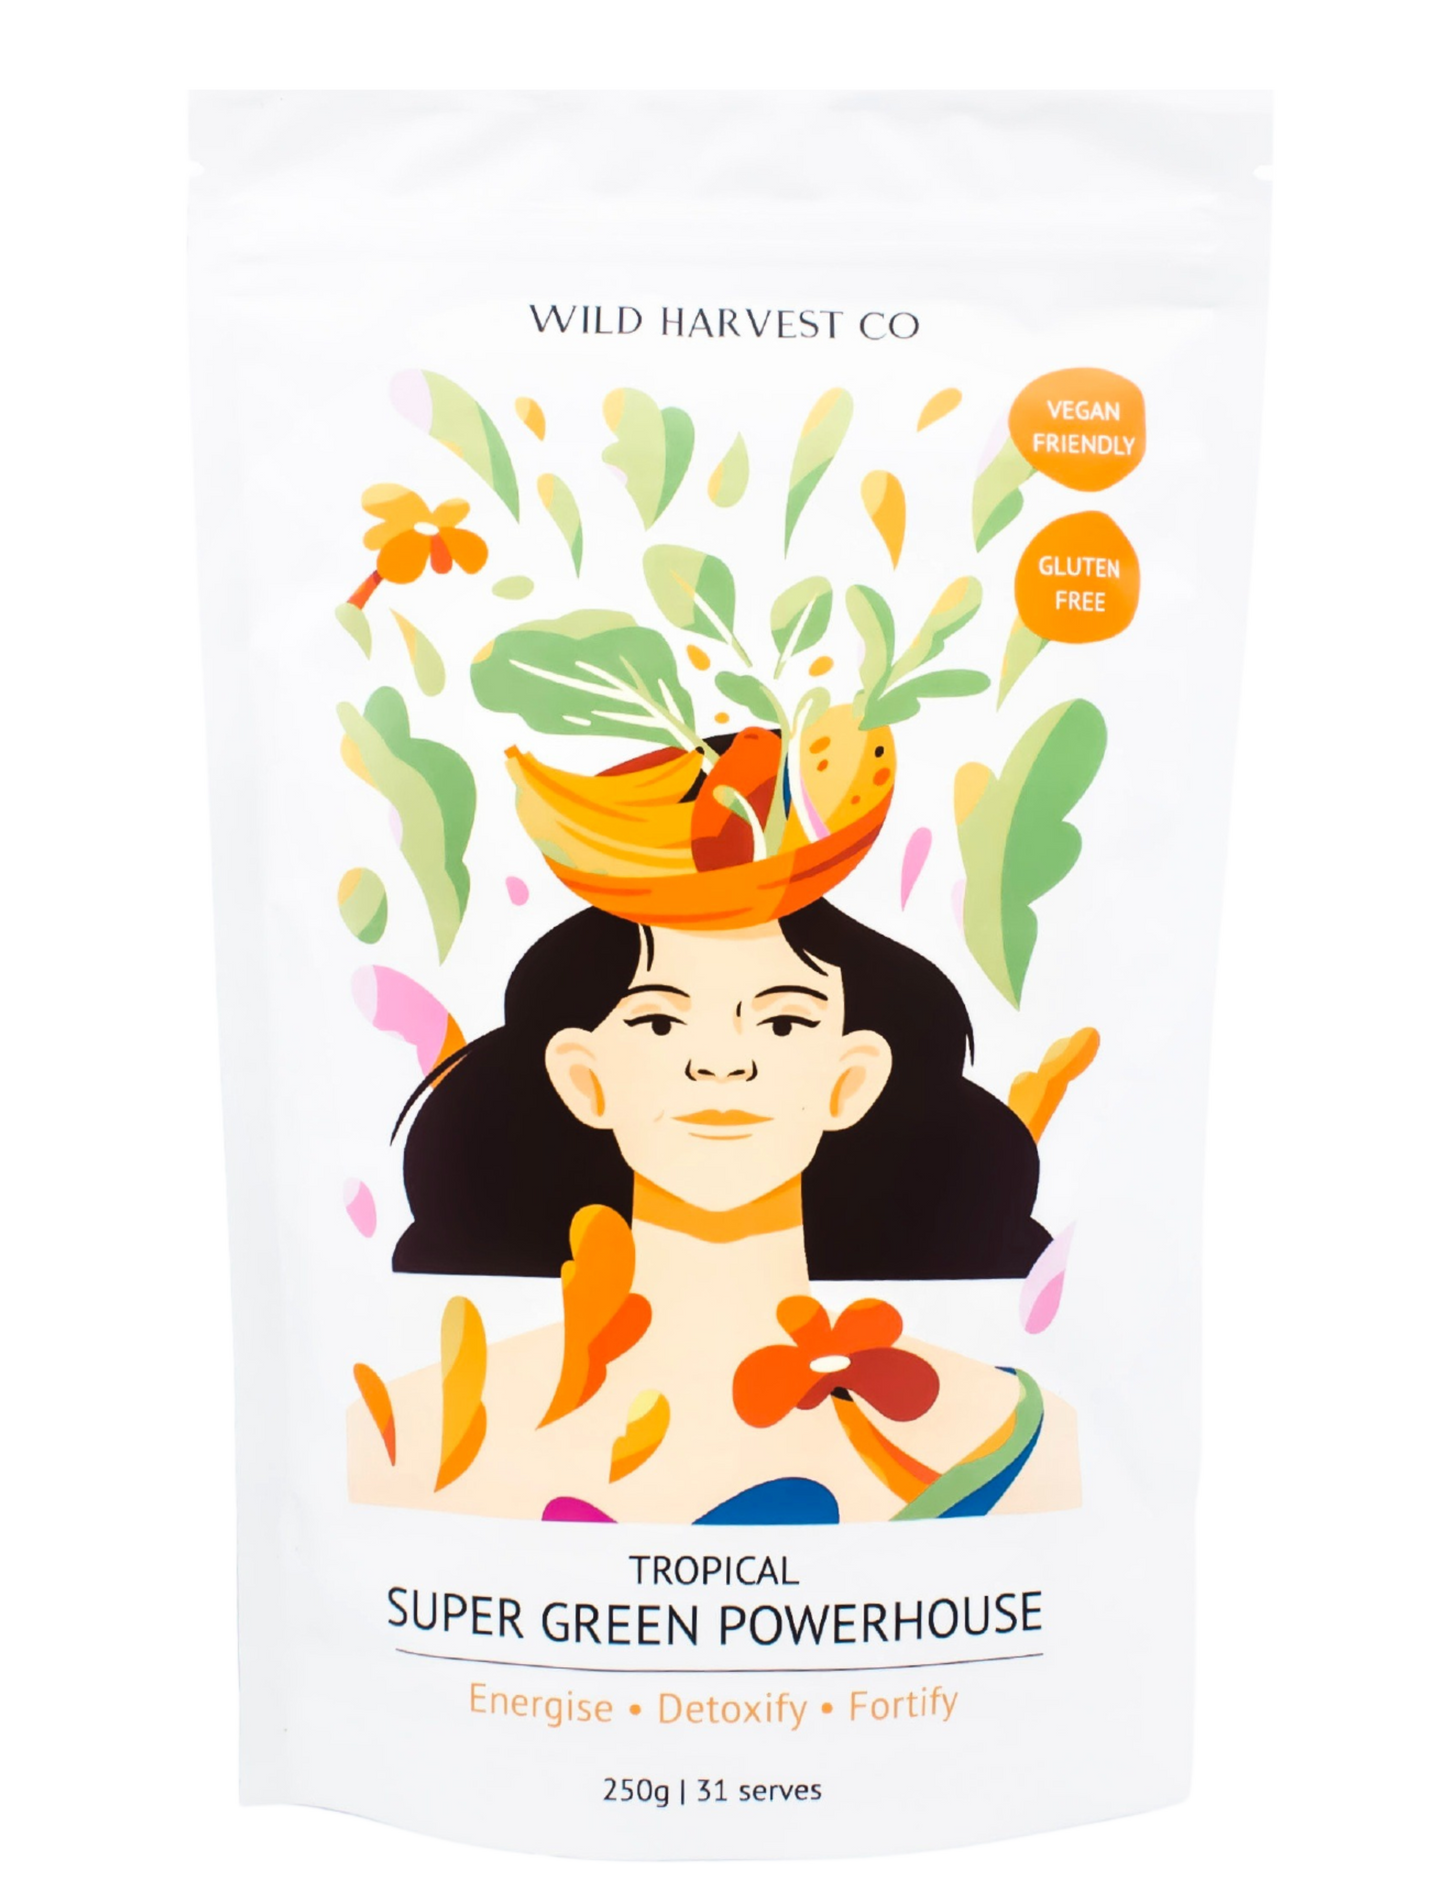 Wild Harvest Co Tropical Supergreen Powerhouse Supplement Pouch with the illustration of a woman with a fruit and vegetable basket on her head